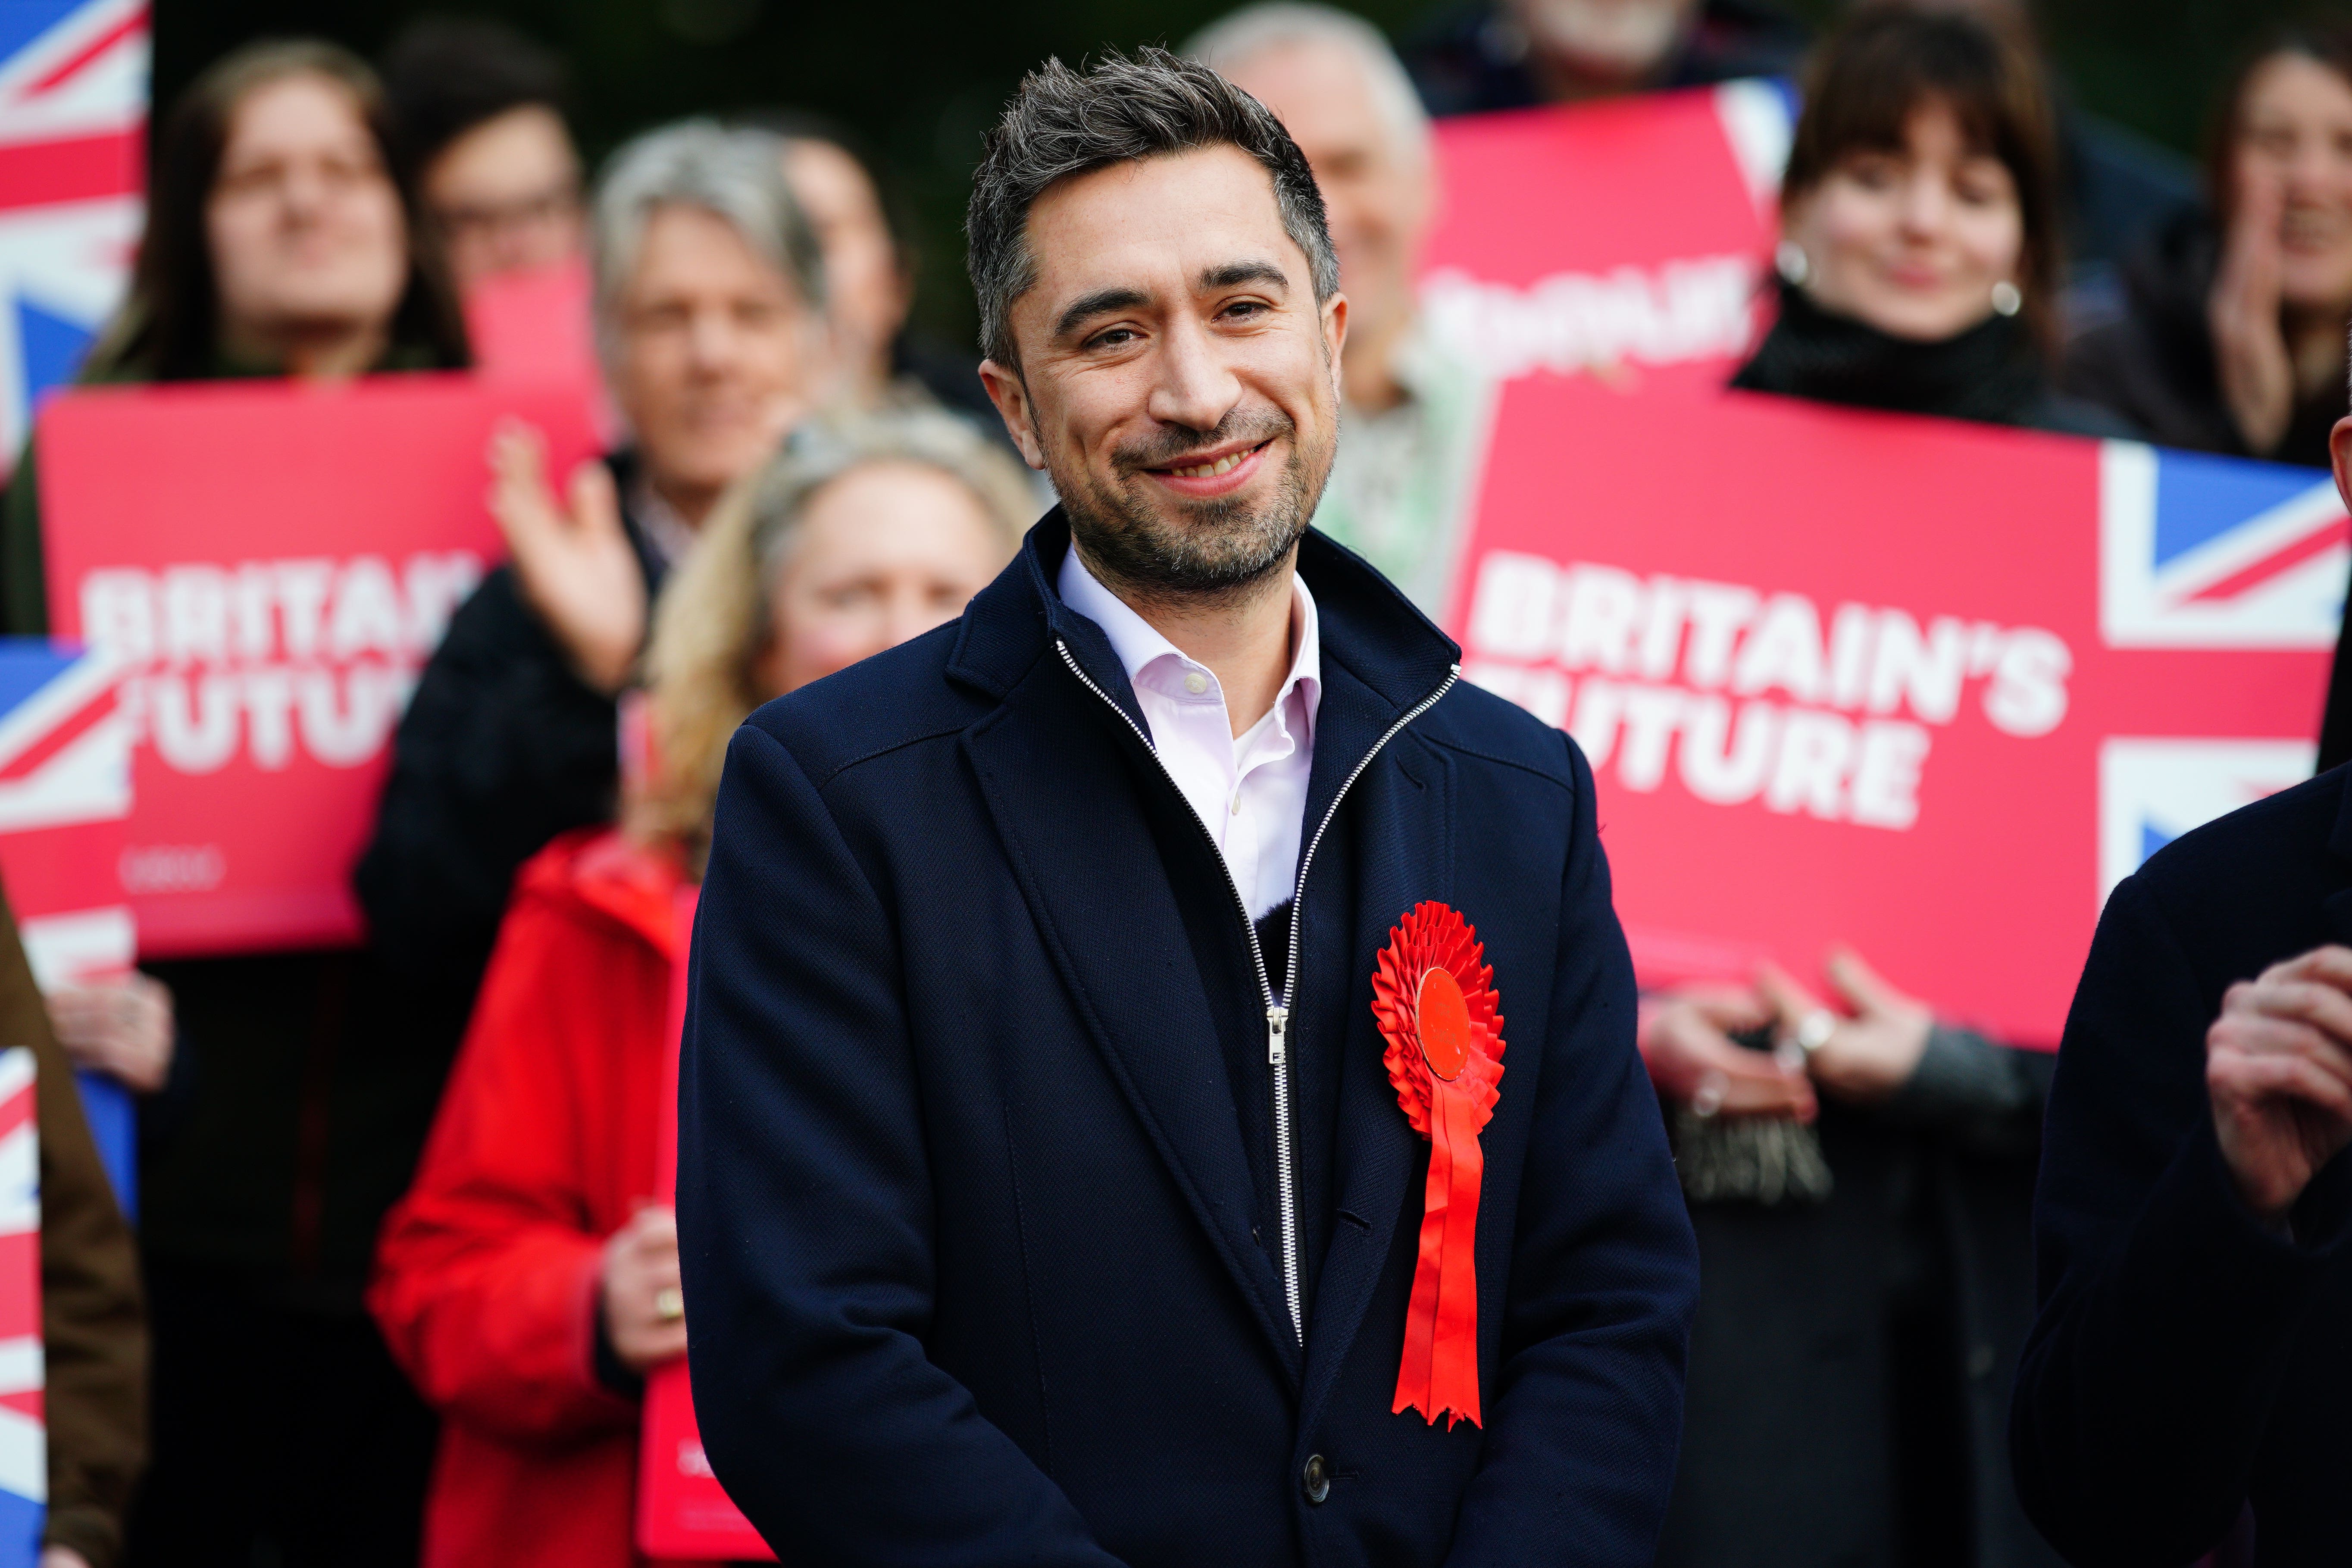 Newly elected Labour MP Damien Egan after being declared winner in the Kingswood by-election (Ben Birchall/PA Wire)